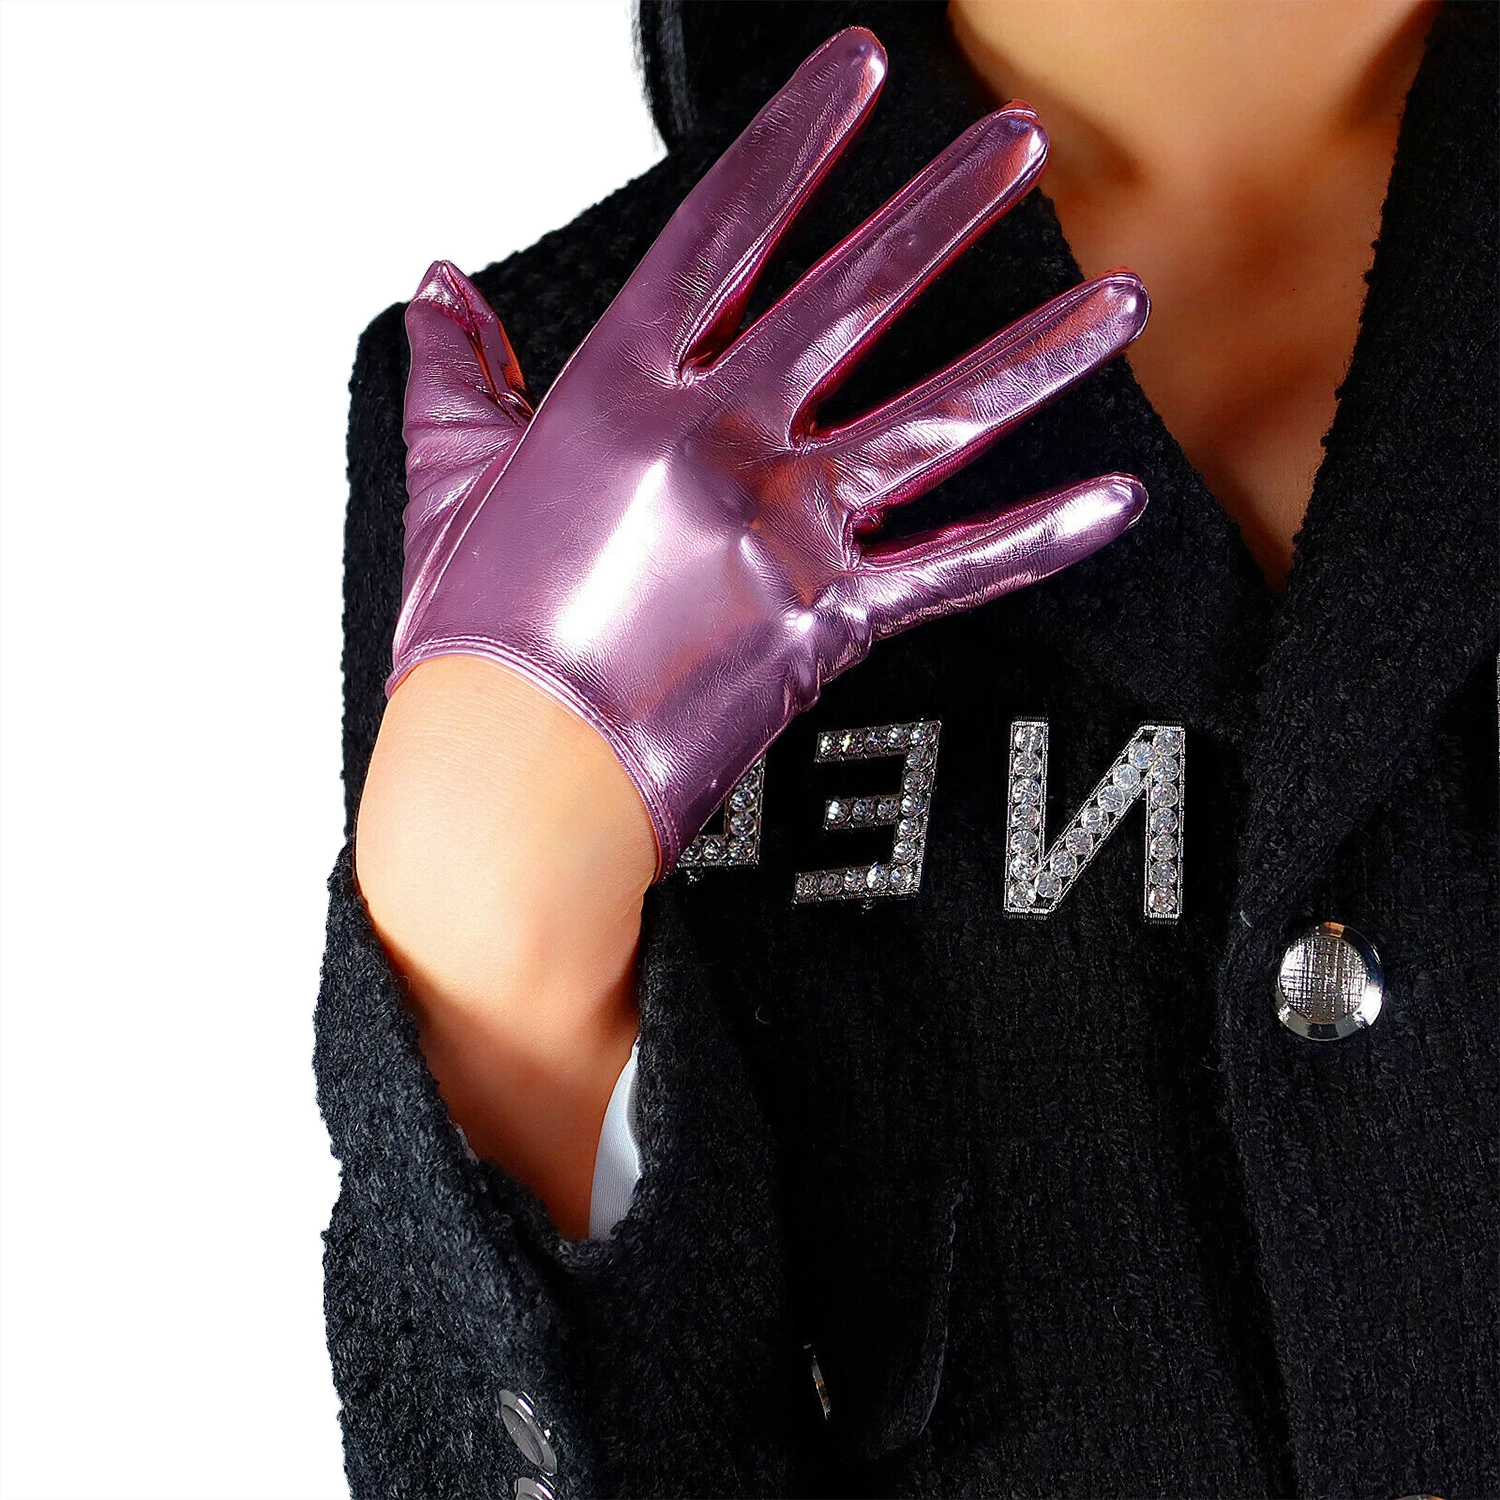 

DooWay Women's Shine Dusty Pink EXTRA SHORT LATEX GLOVES Faux Patent Leather 16cm Evening Dressing Party Cosplay Nightclub Glove